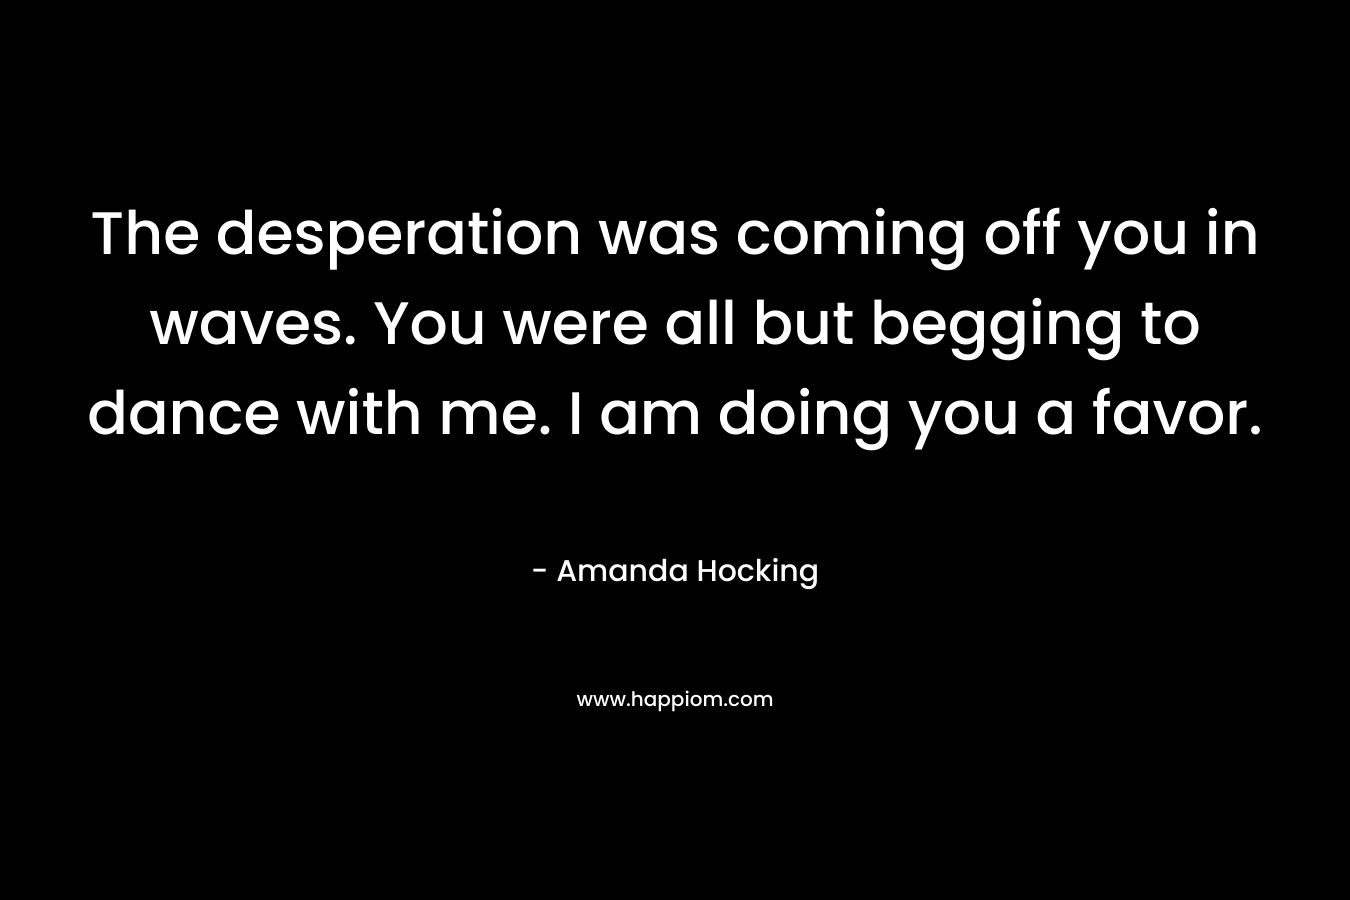 The desperation was coming off you in waves. You were all but begging to dance with me. I am doing you a favor. – Amanda Hocking